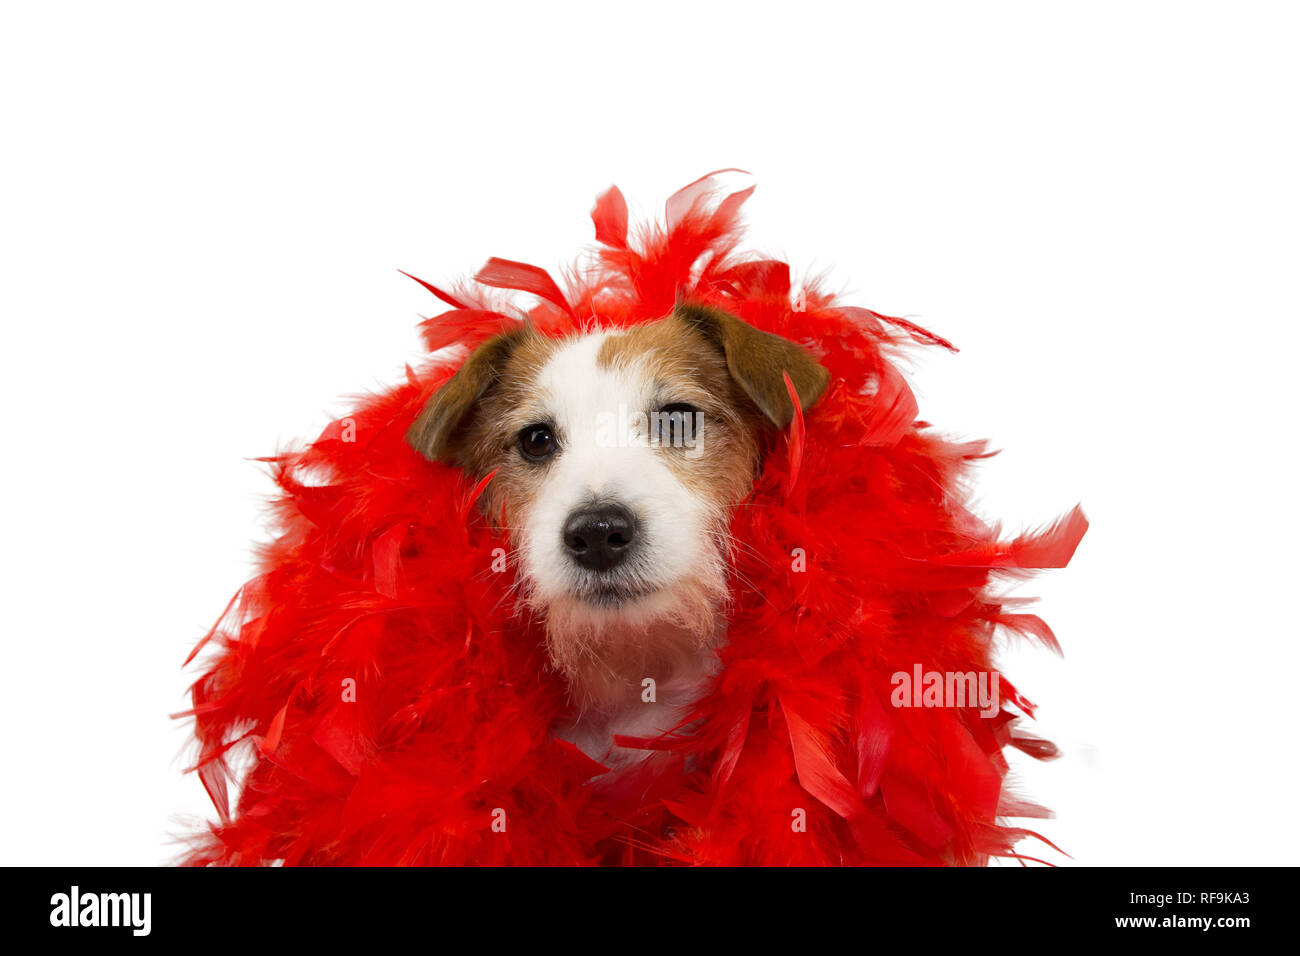 FUNNY DOG IN MARDI GRAS CARNIVAL RED FEATHER BOA. ISOLATED STUDIO SHOT AGAINST WHITE BACKGROUND. Stock Photo